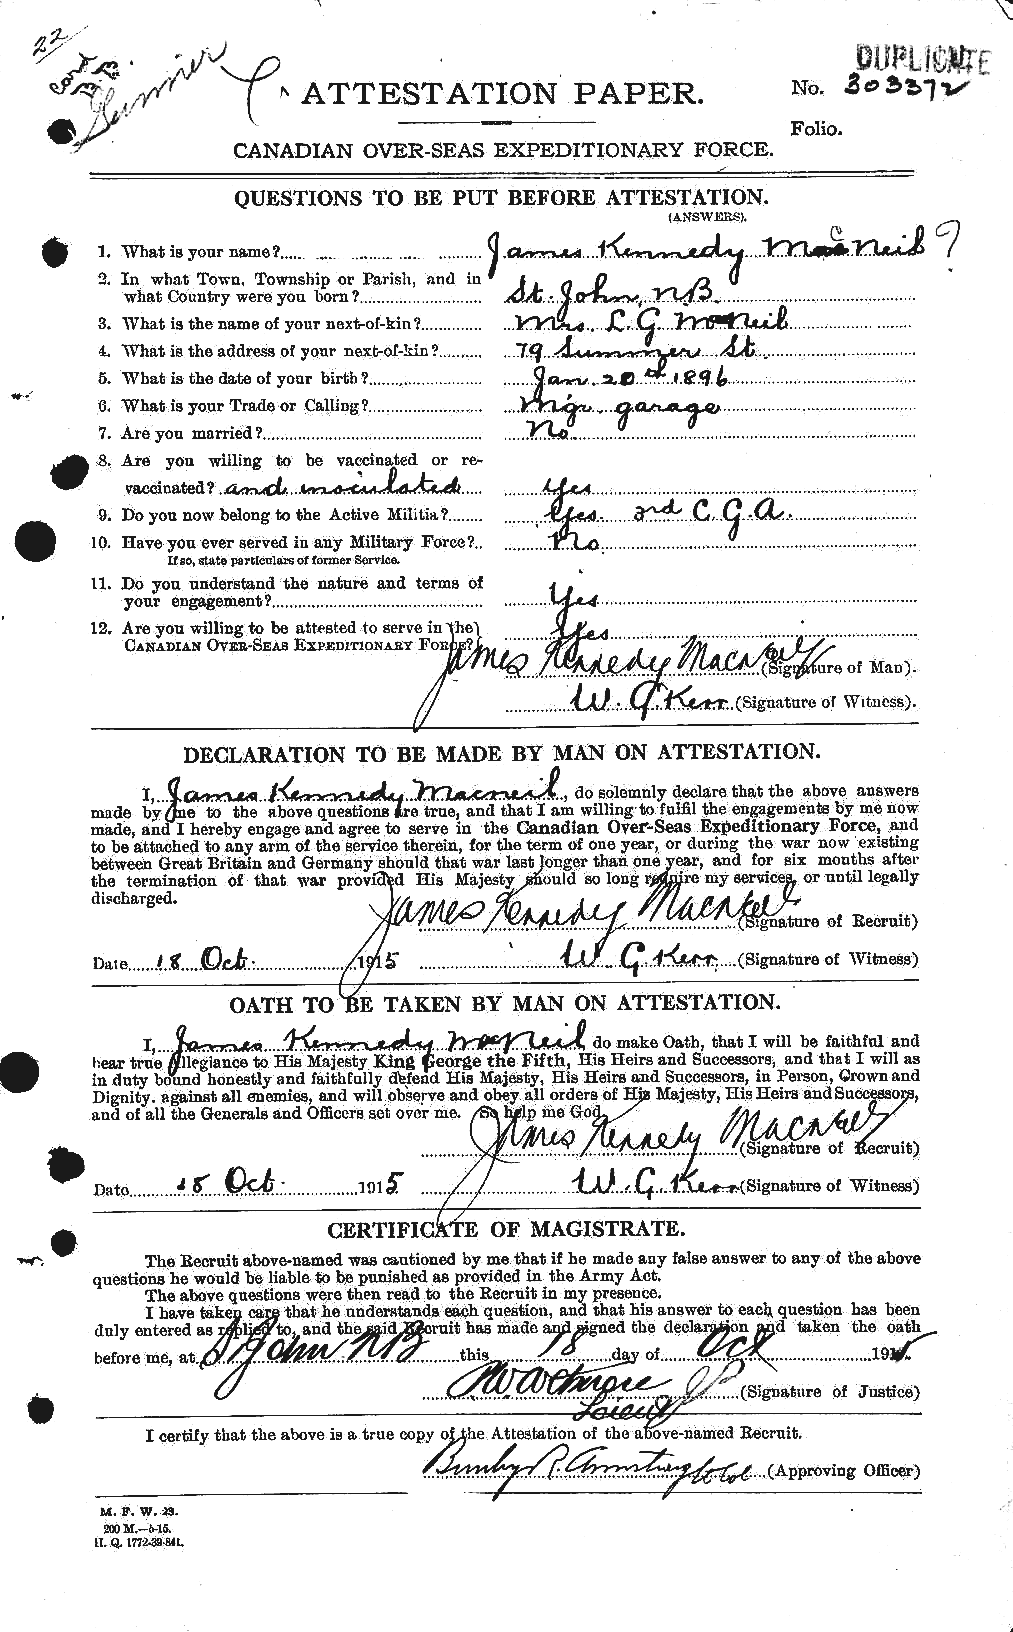 Personnel Records of the First World War - CEF 542272a